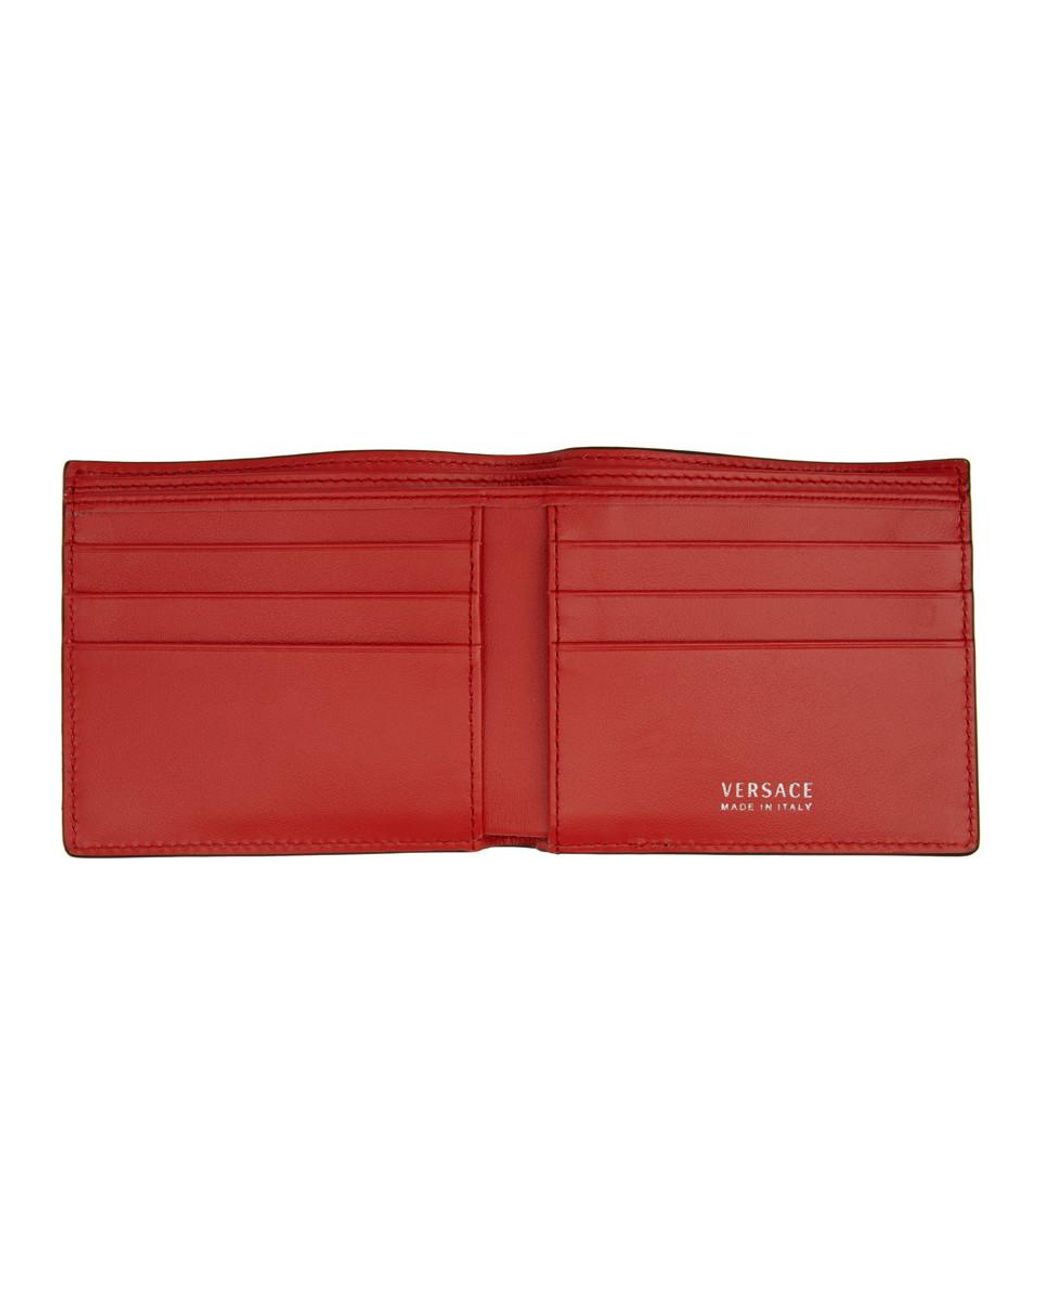 PERSONALIZED Leather Men's Wallet/ Bifold Wallet/ Red -  Finland